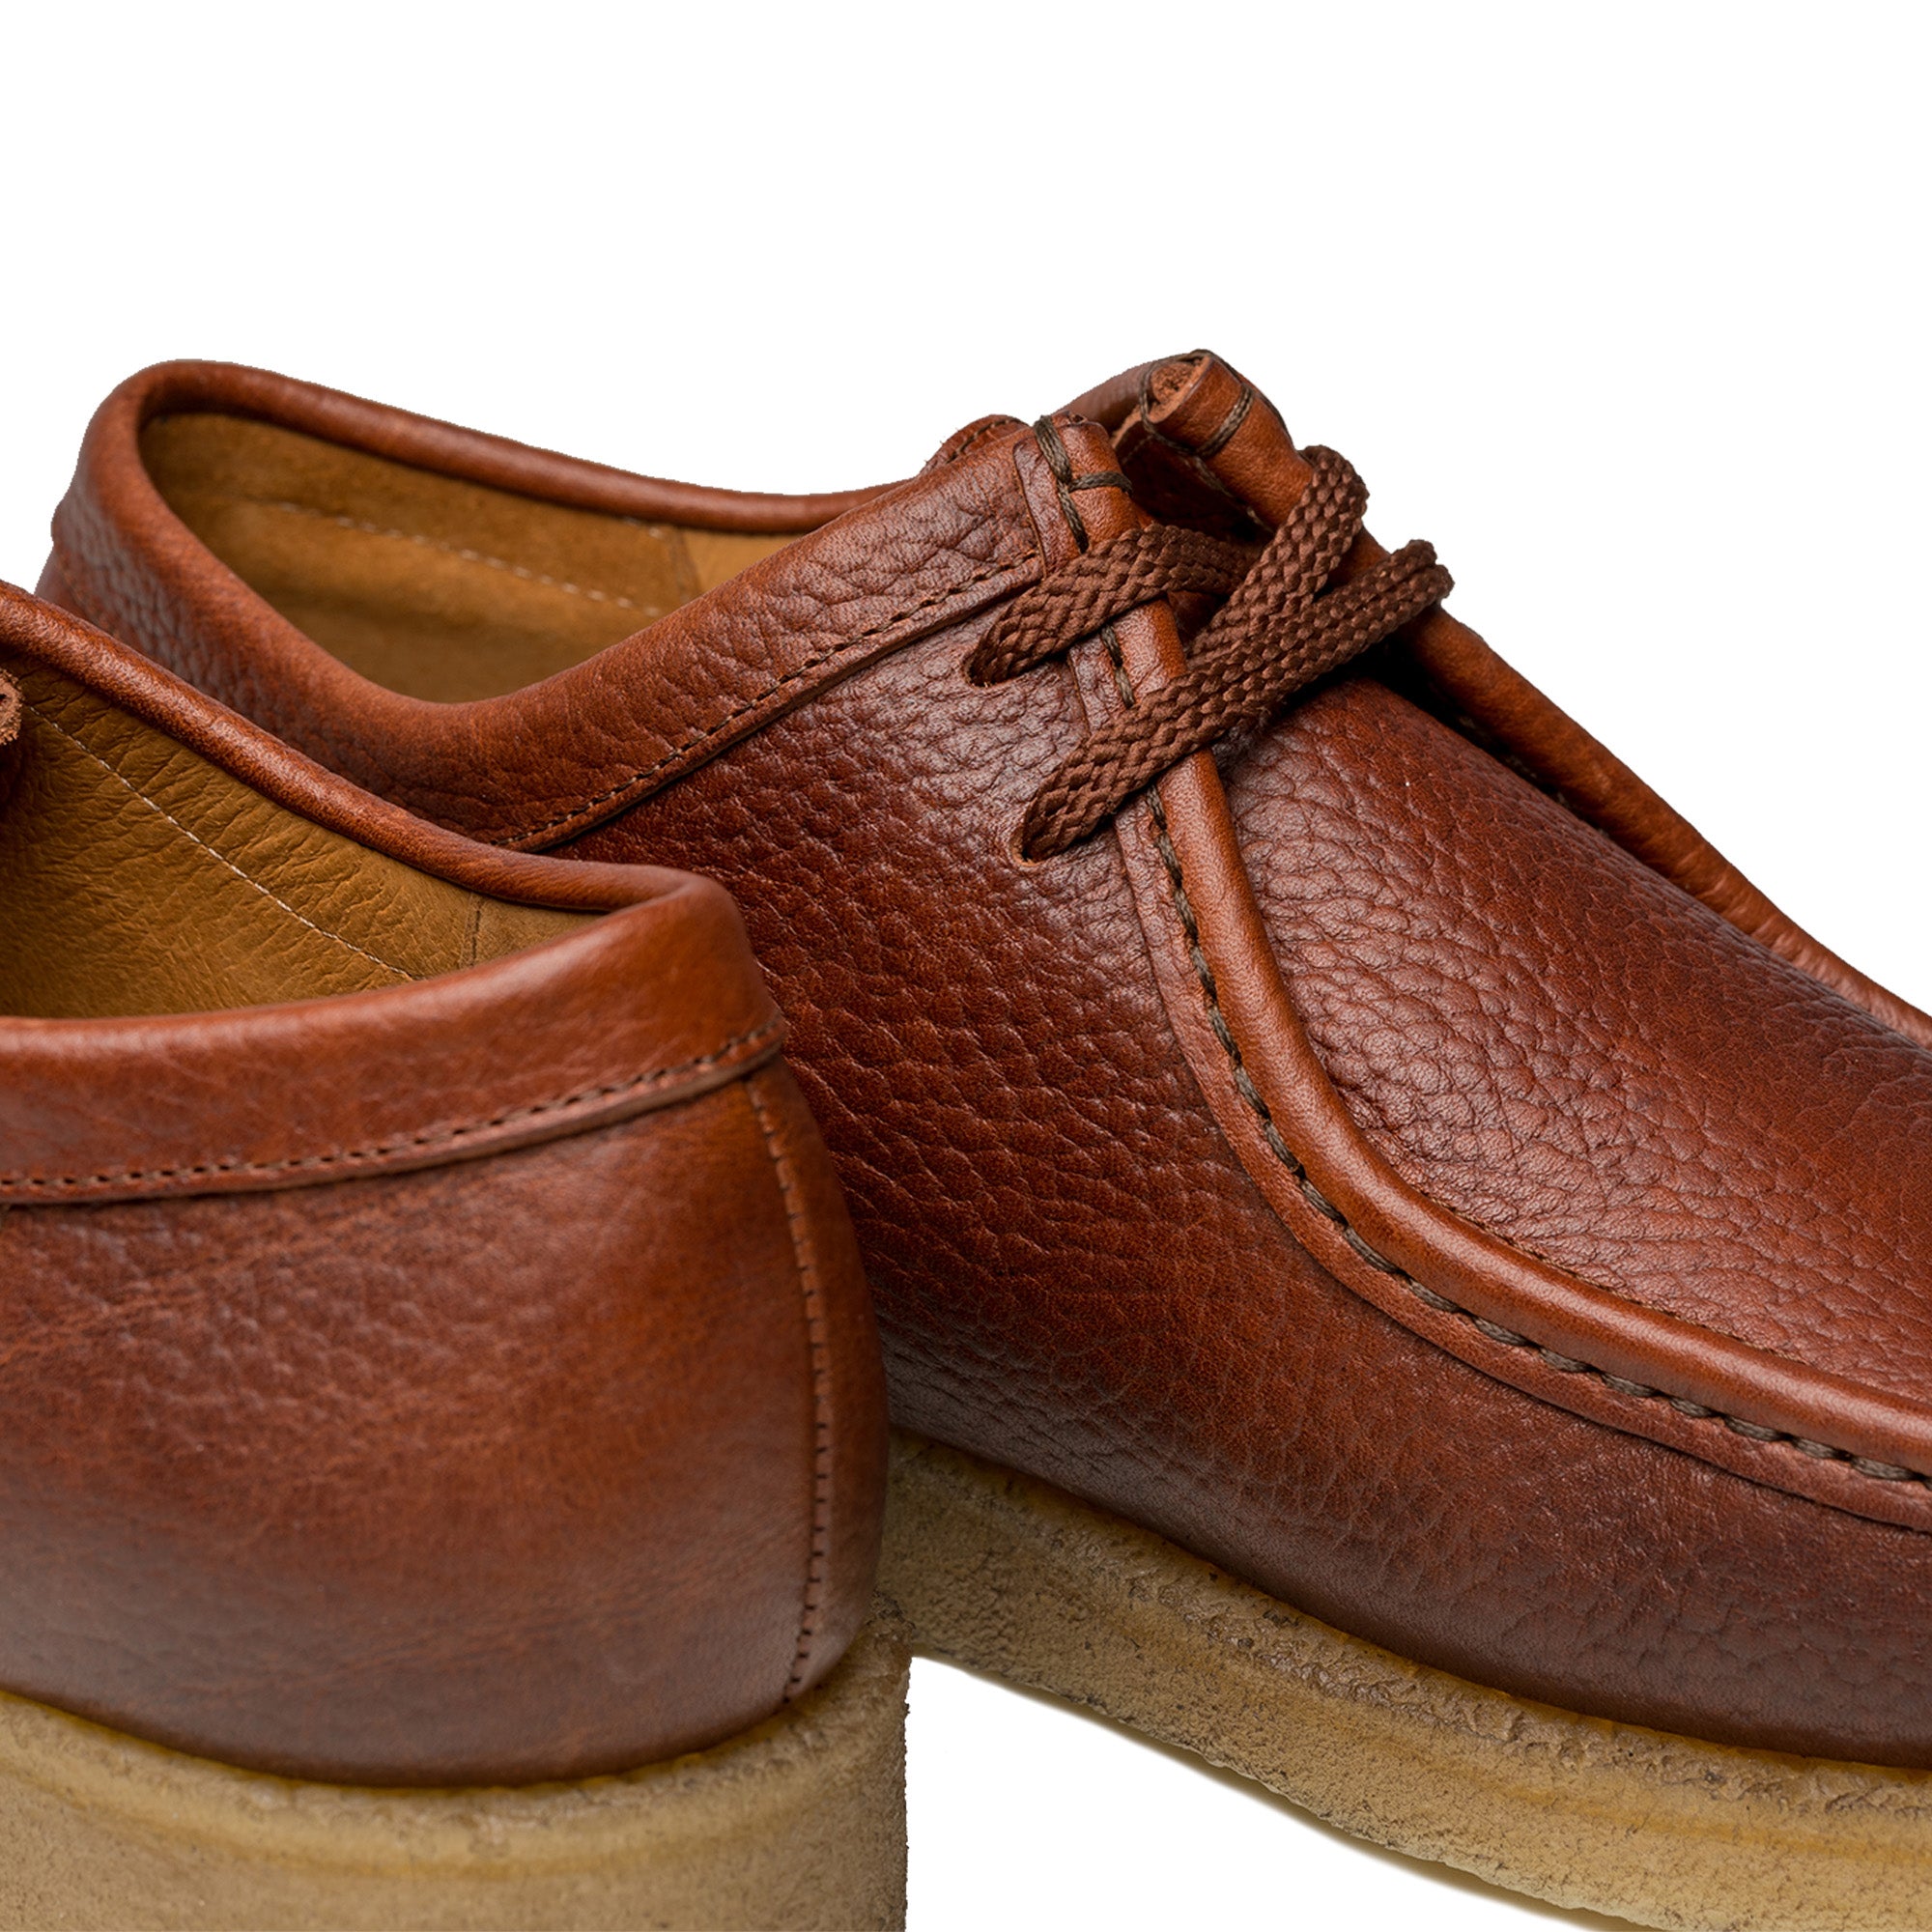 P204 The Original Padmore & Barnes Iconic Style – Brown Romance Leather